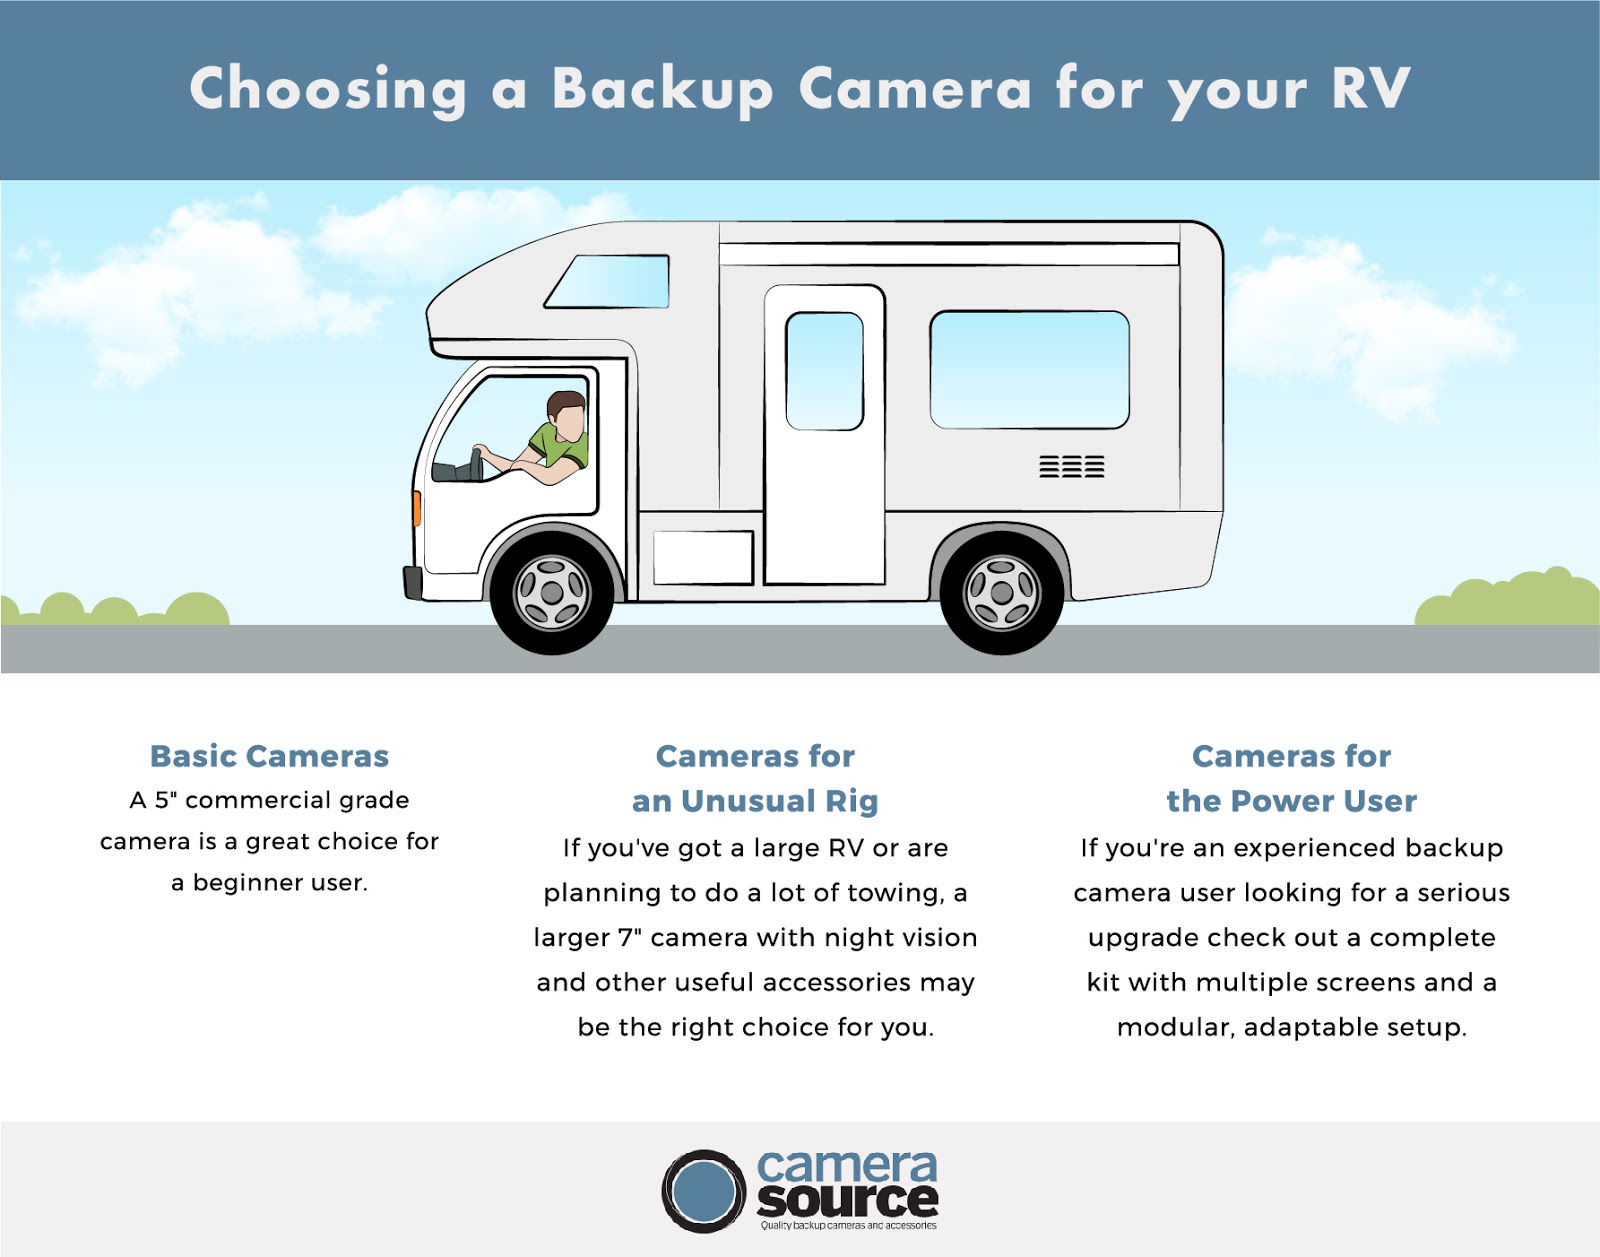 Don't miss out on this awesome list of backup cameras if you want to be a safe and secure RV driver